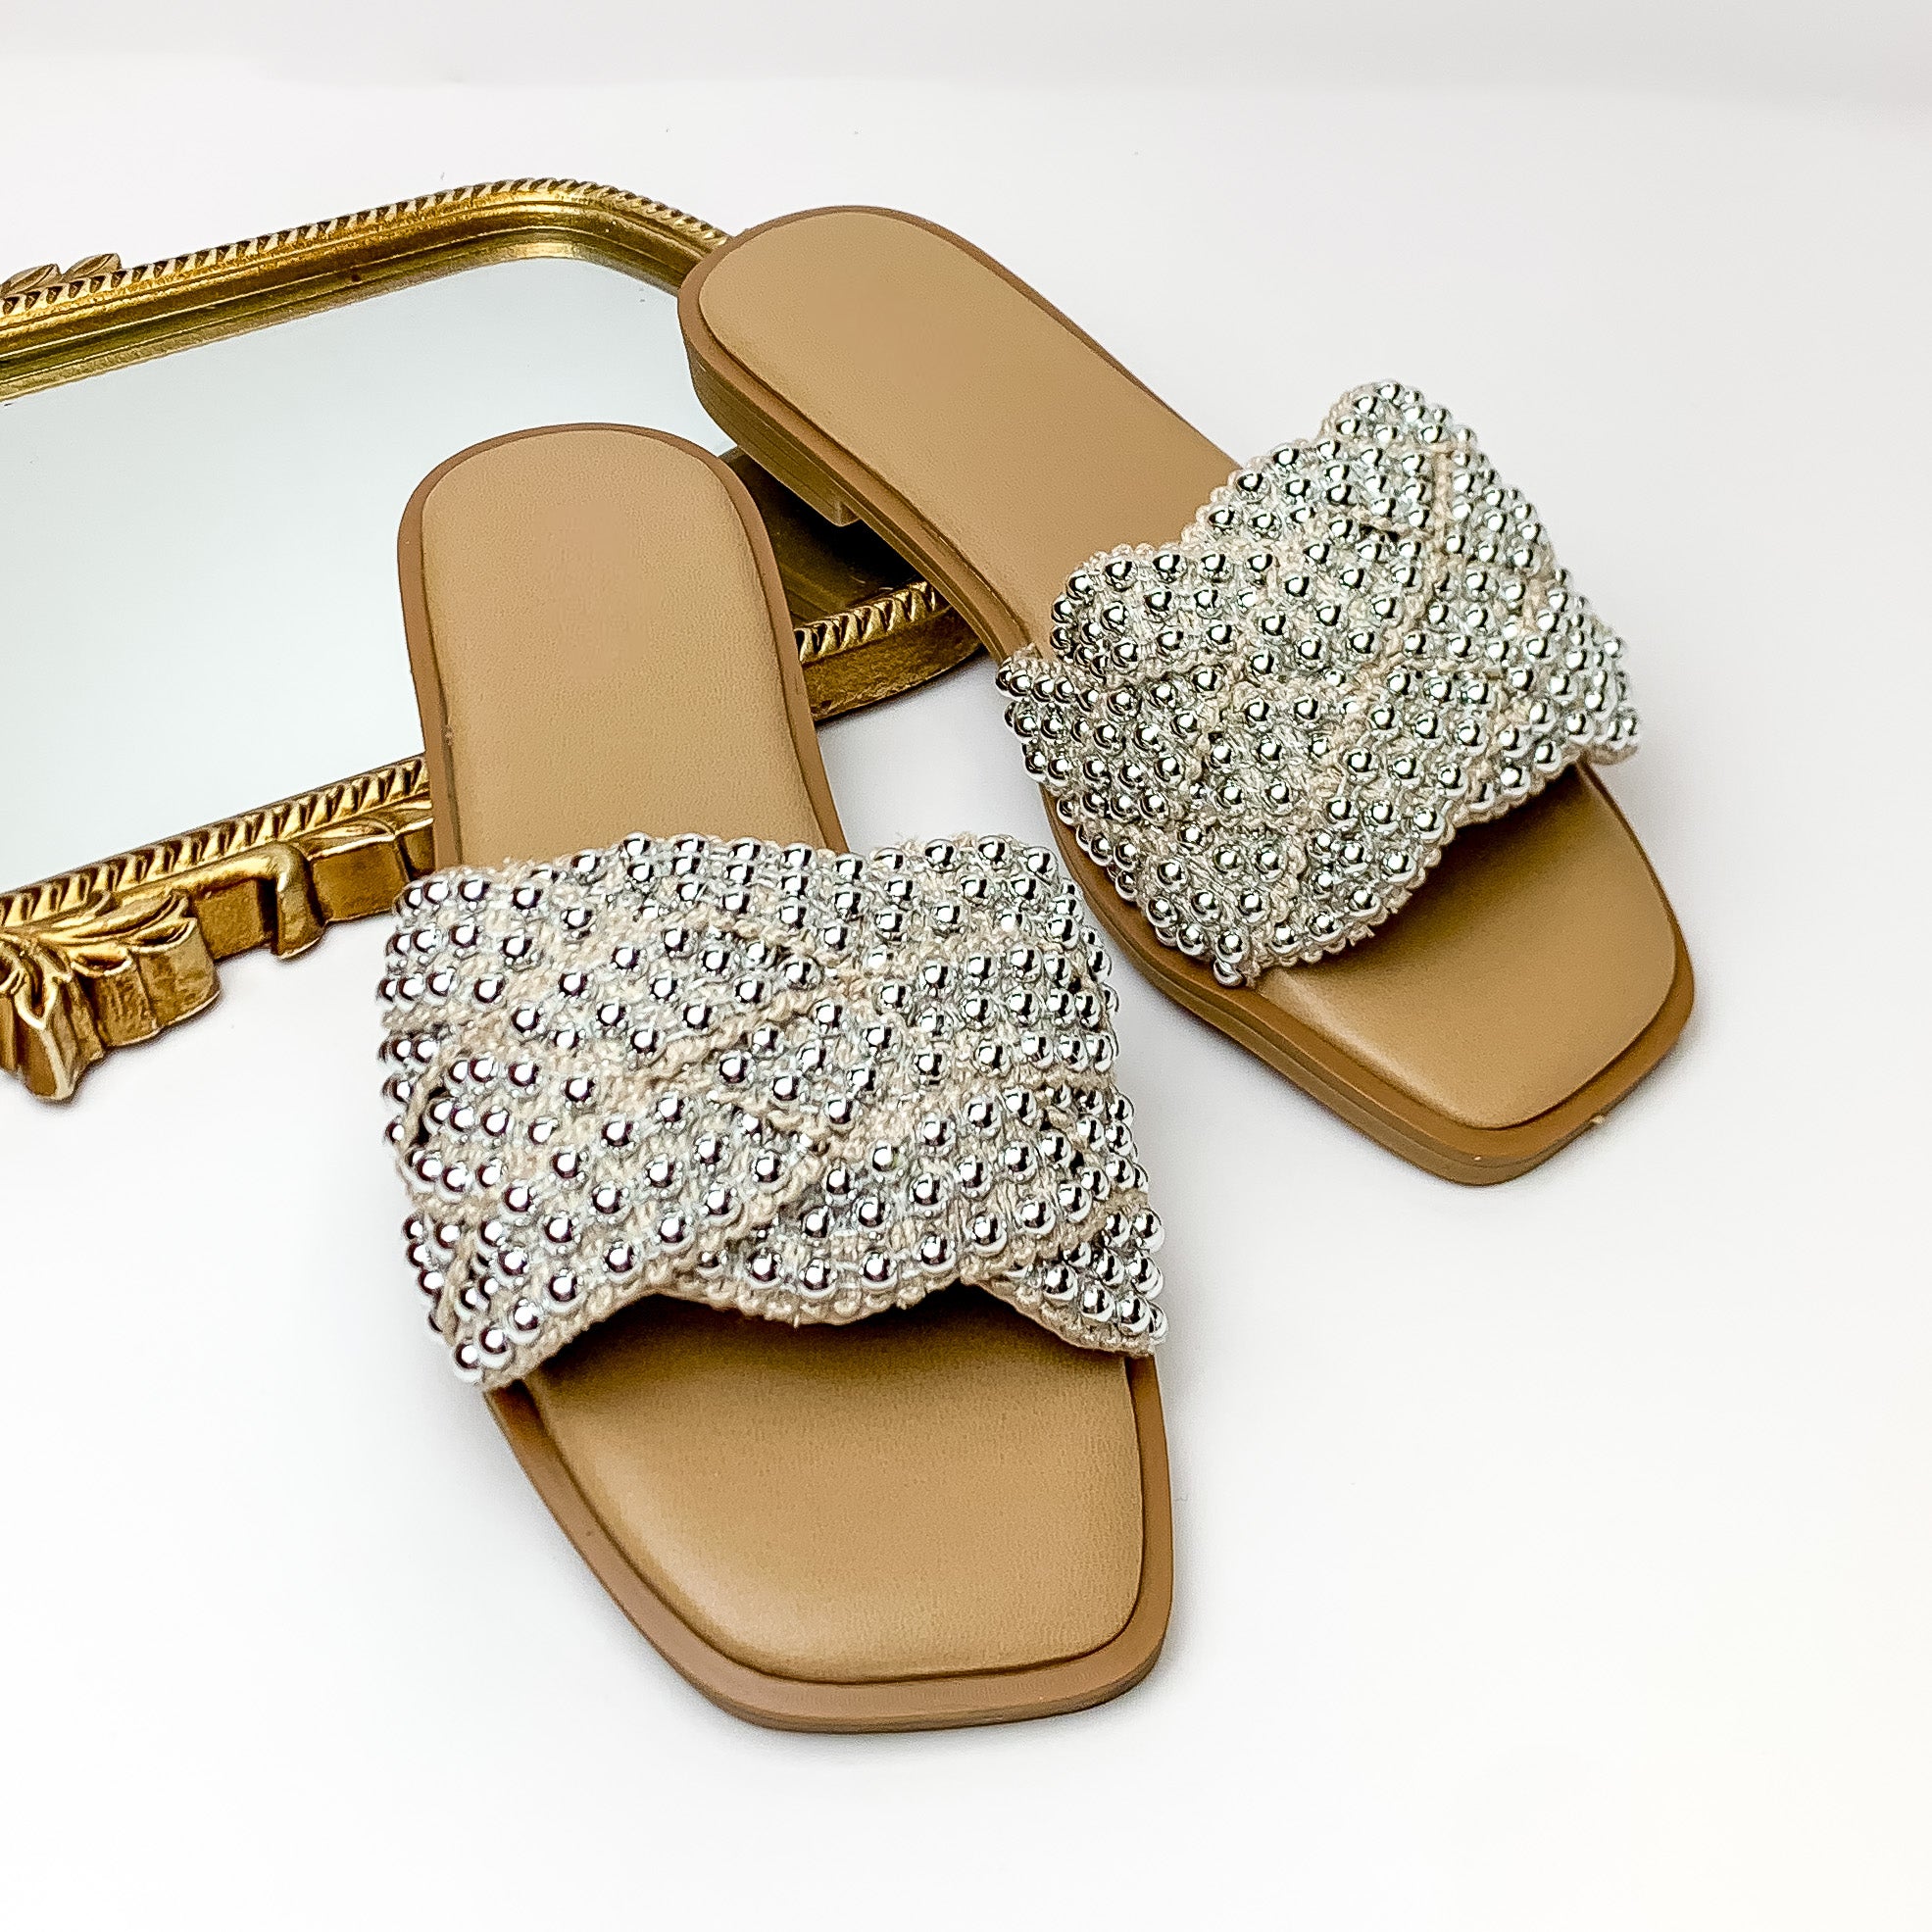 Totally Darling Nude Knit Slide On Sandals with Silver Beaded Embellishment - Giddy Up Glamour Boutique